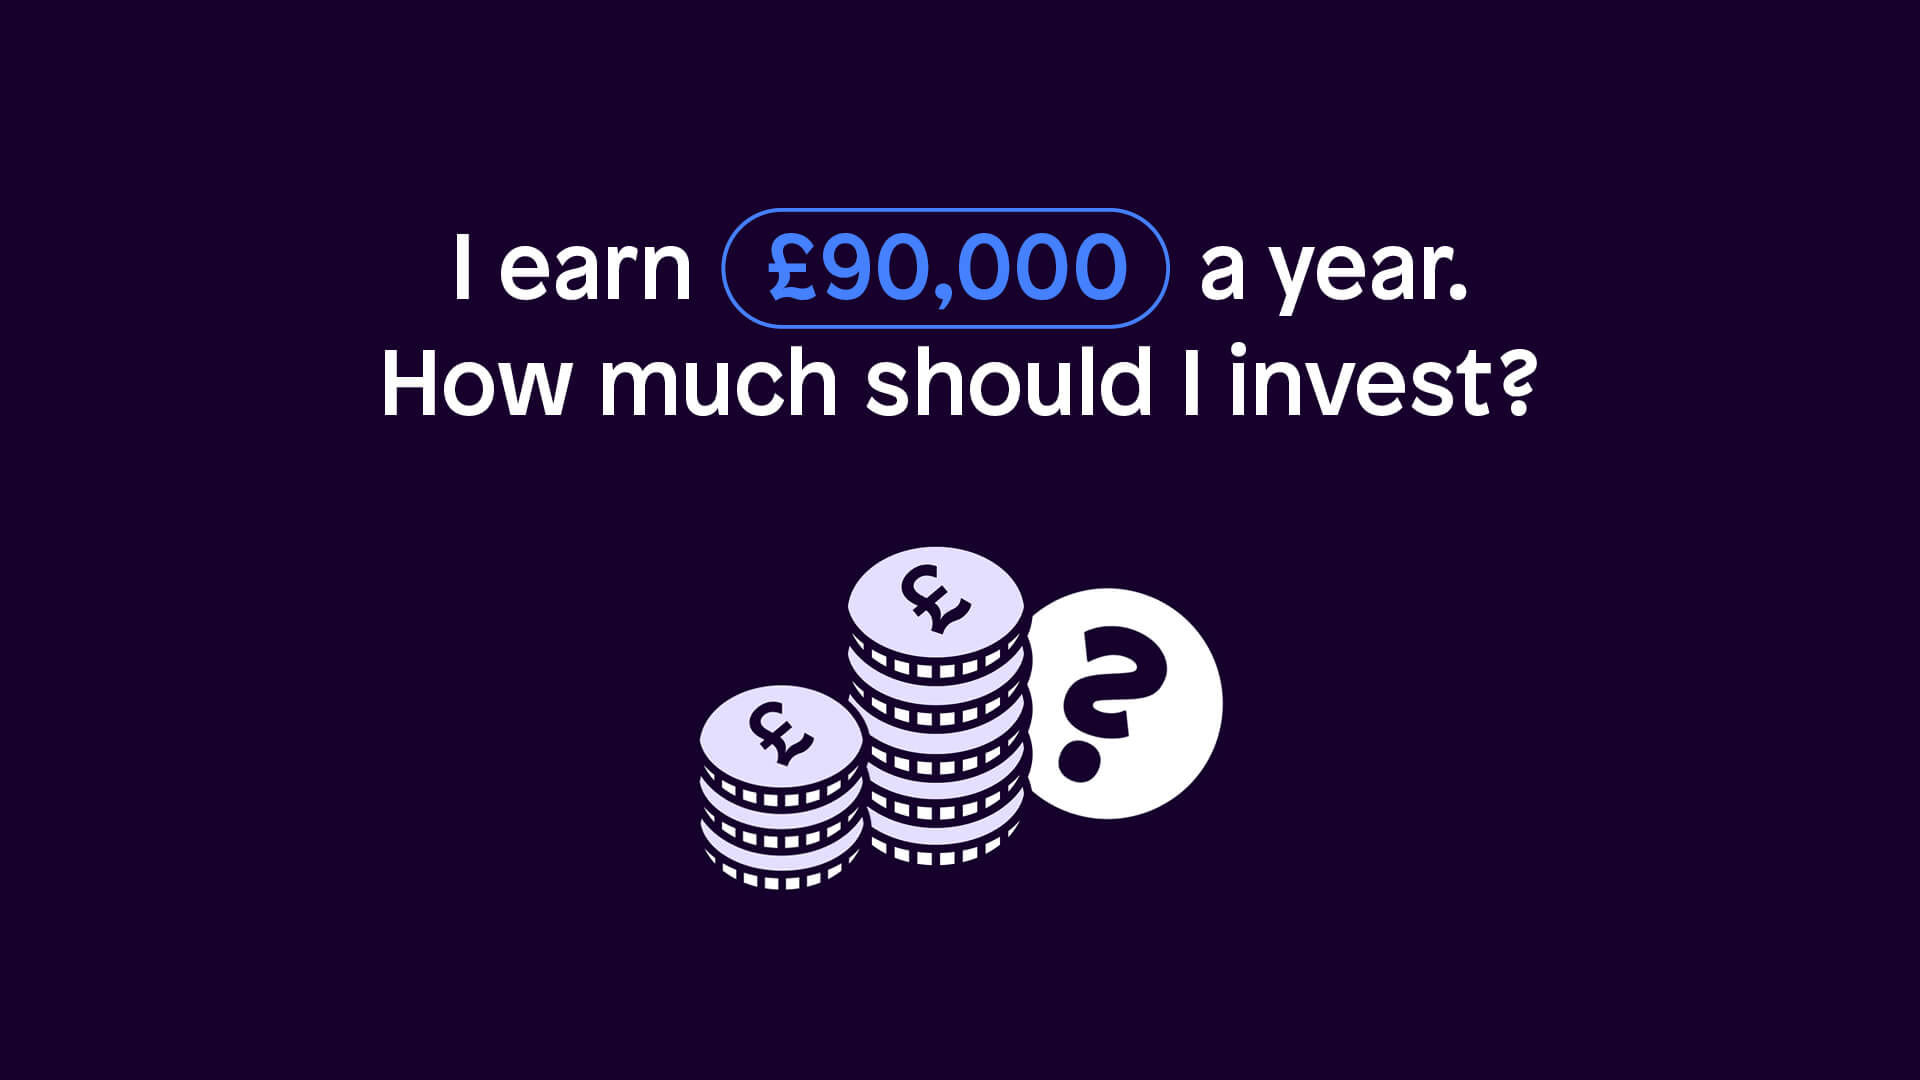 How much should I invest earning £90,000 per year?